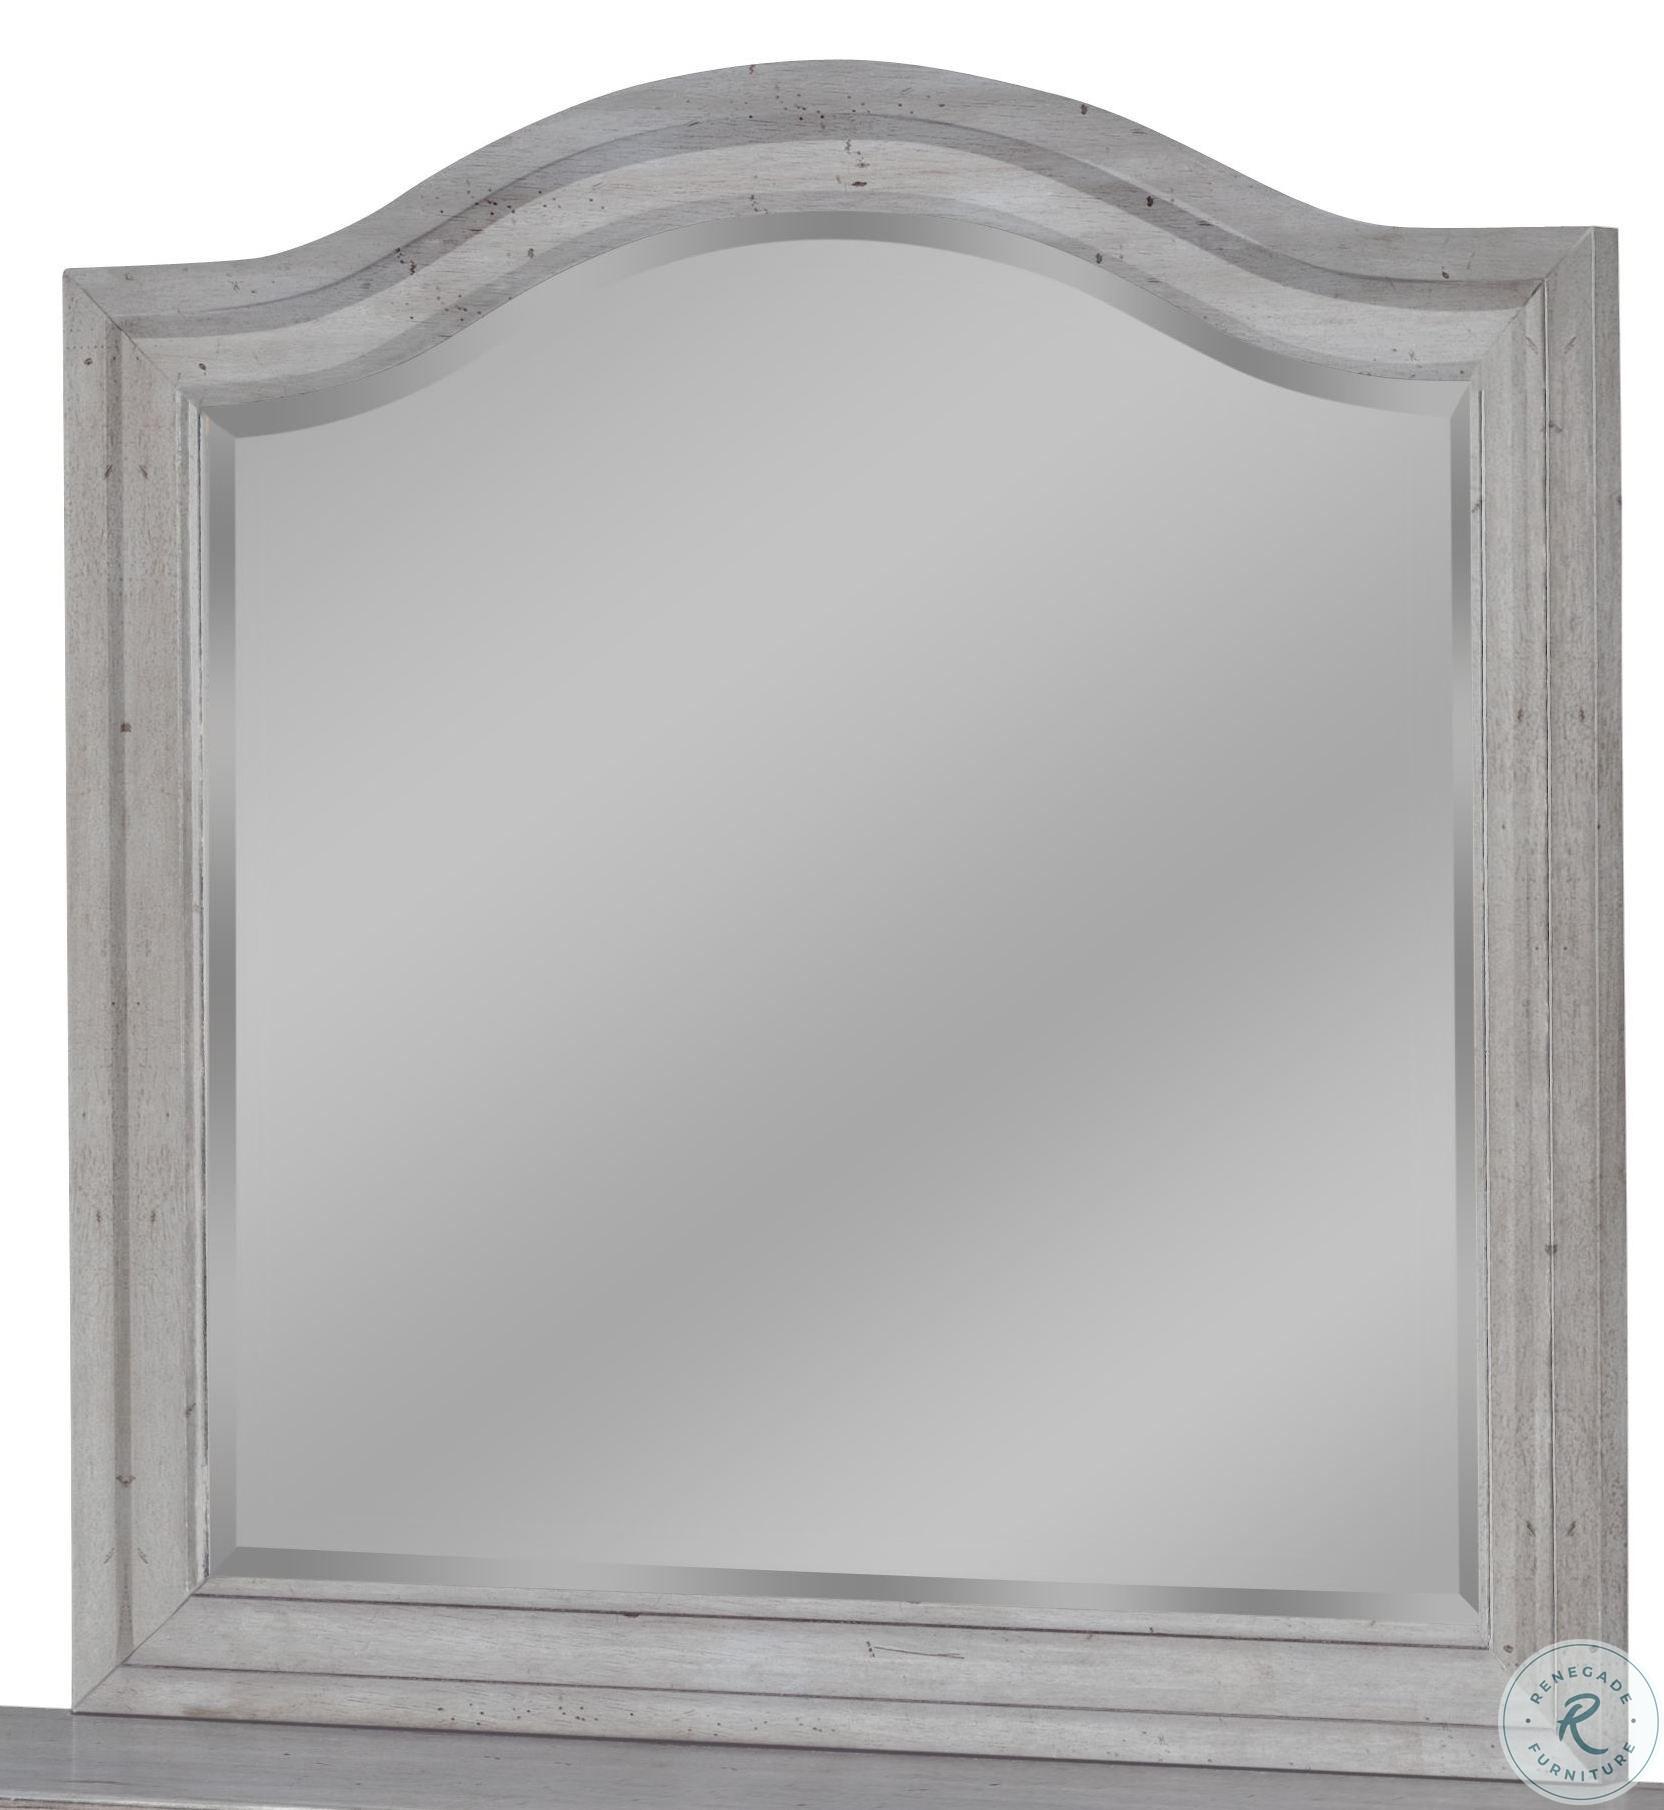 

    
American Woodcrafters 7820 STONEBROOK Dresser With Mirror Antique/Gray 7820-DLM
